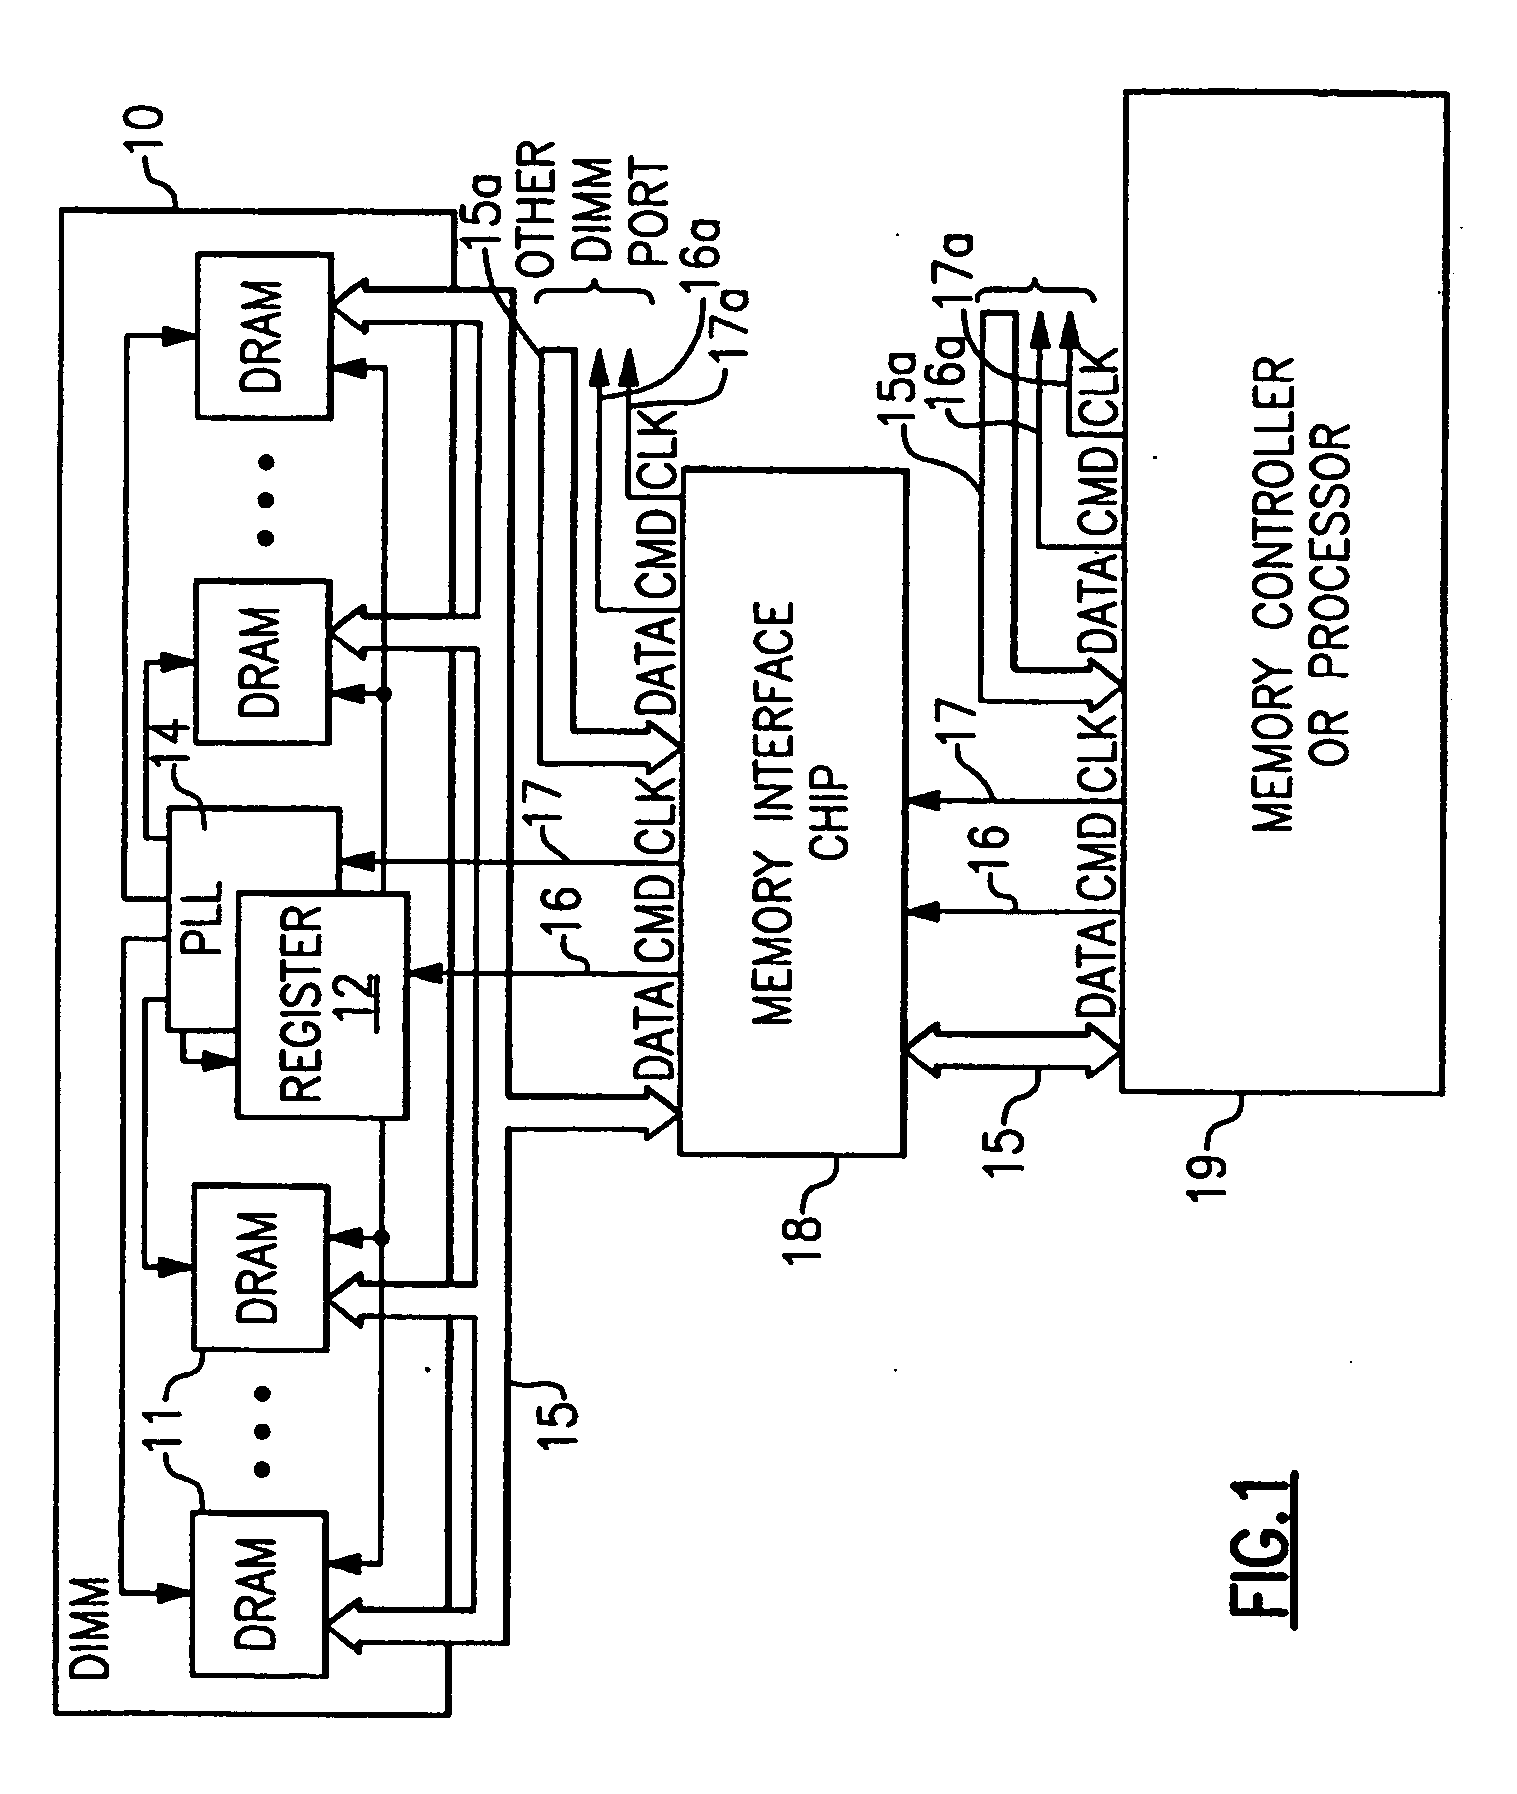 High reliability memory module with a fault tolerant address and command bus